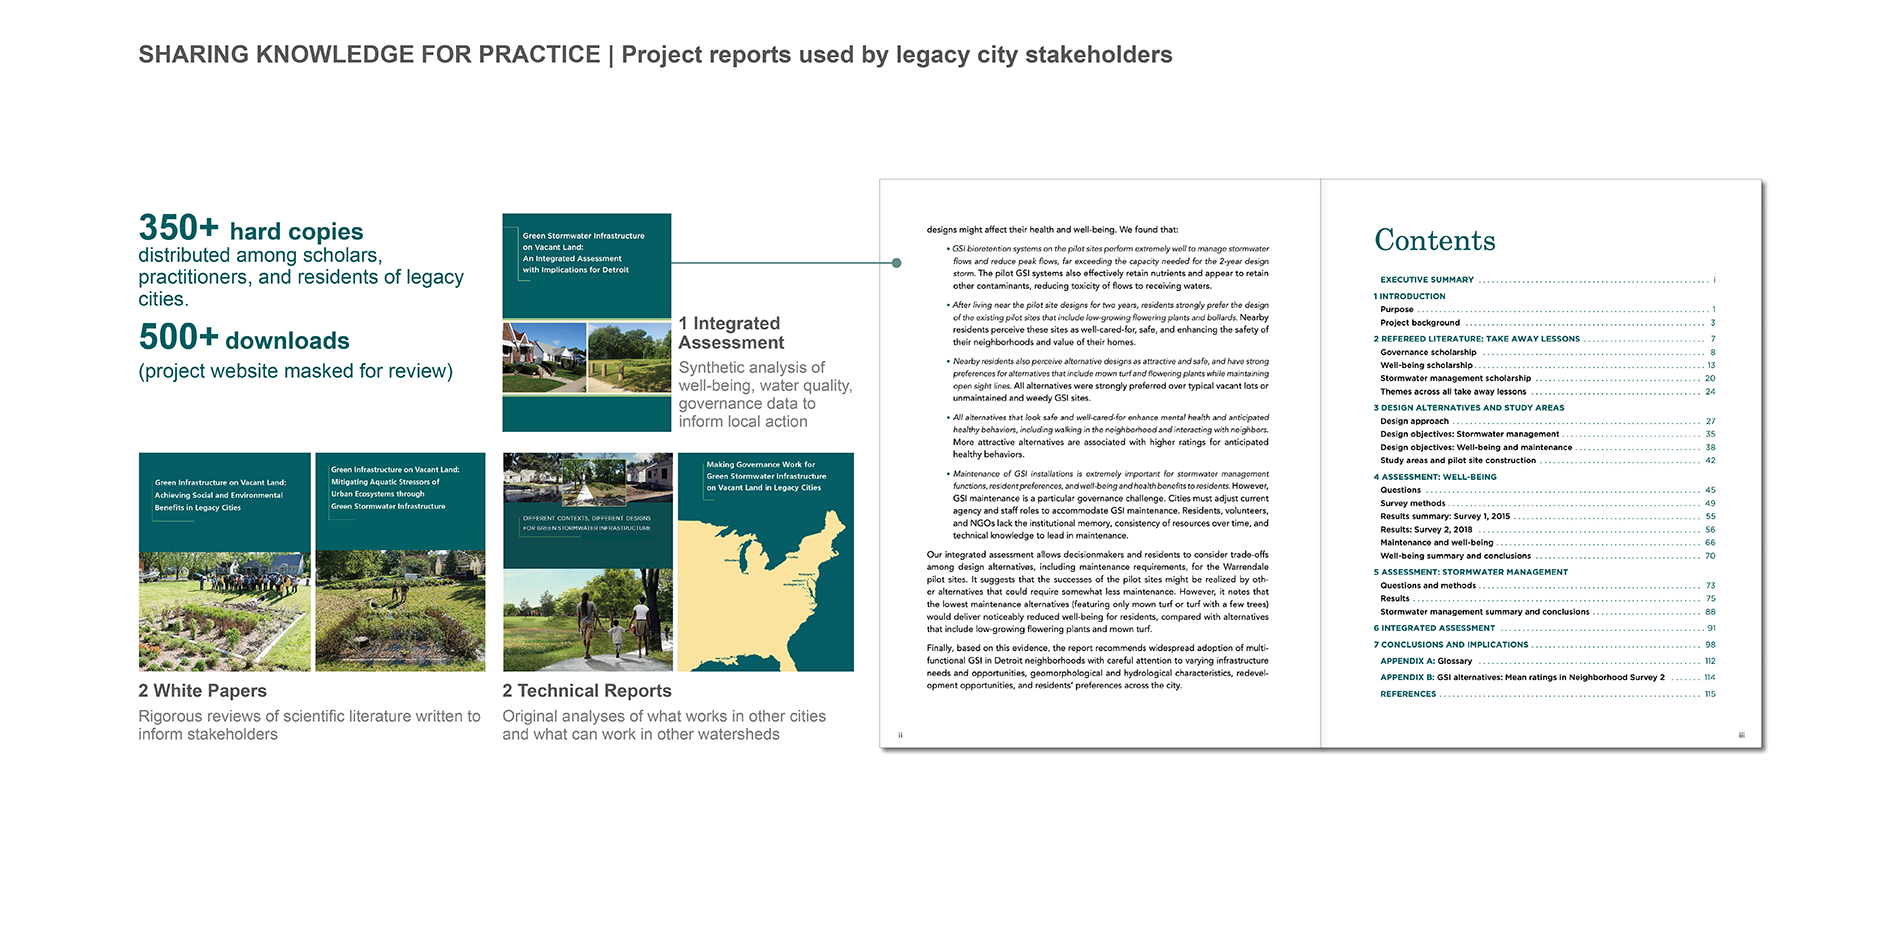 SHARING KNOWLEDGE FOR PRACTICE: Project reports used by legacy city stakeholders